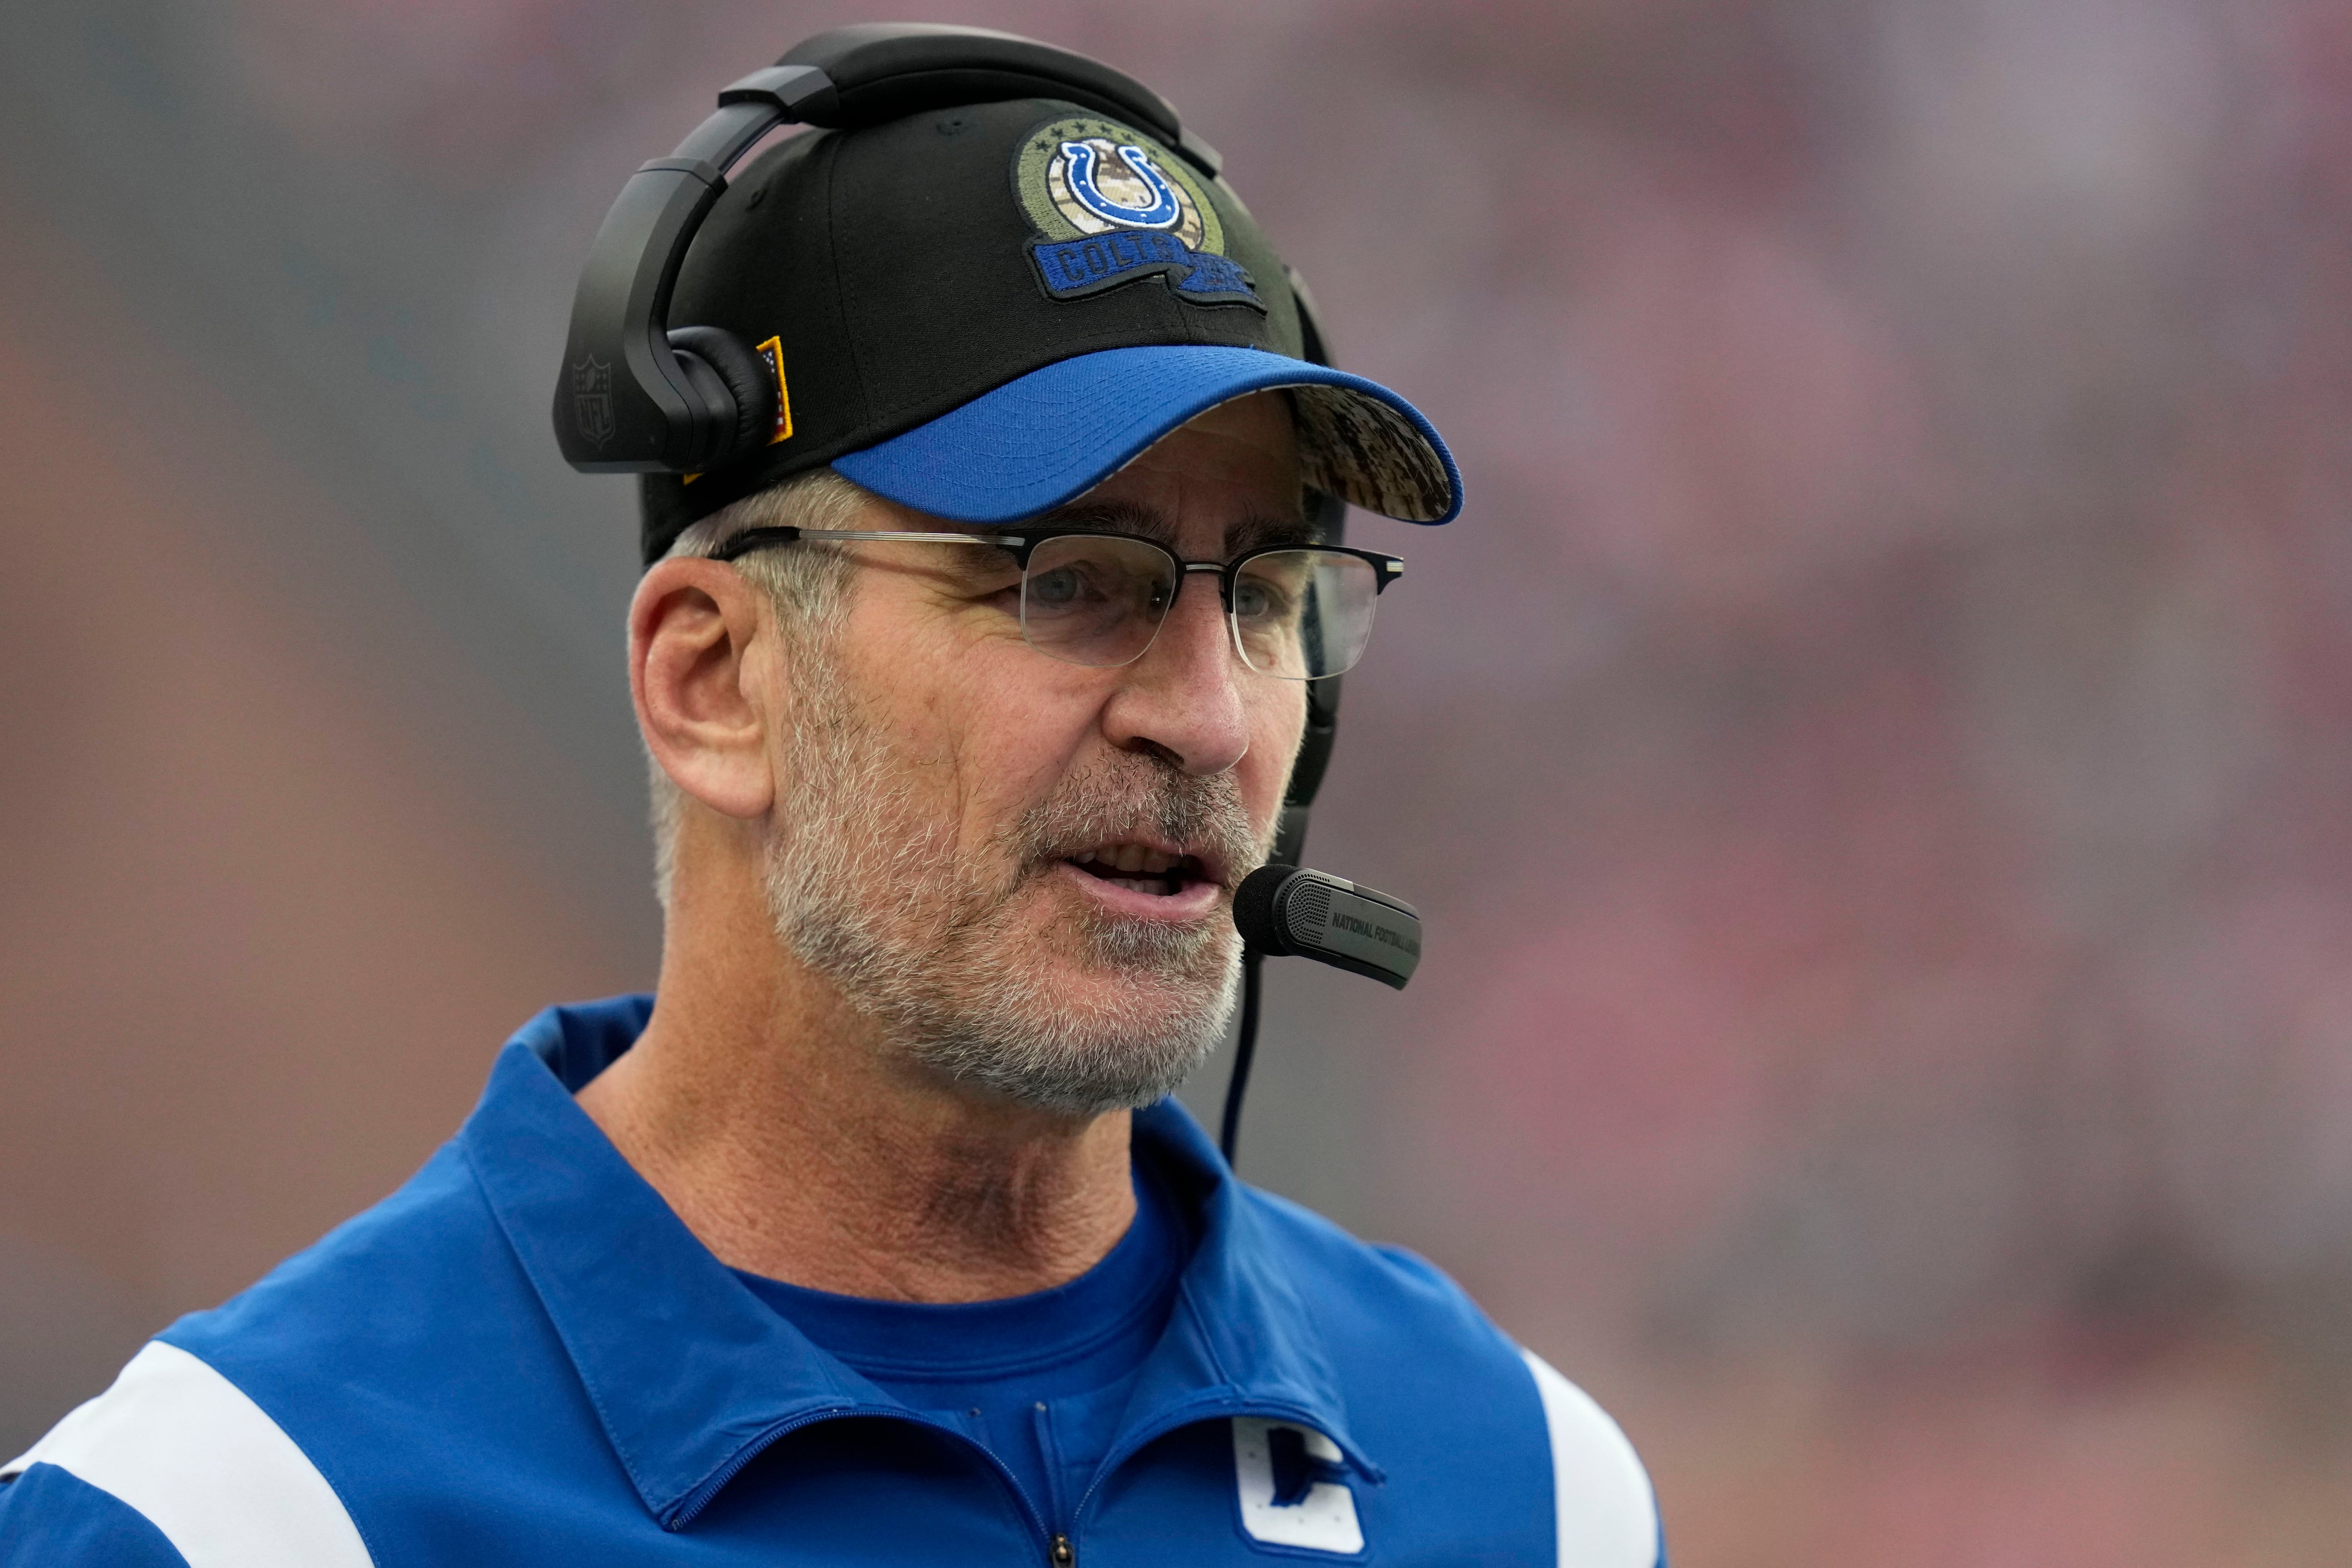 Indianapolis Colts fire head coach Frank Reich, Jeff Saturday named interim